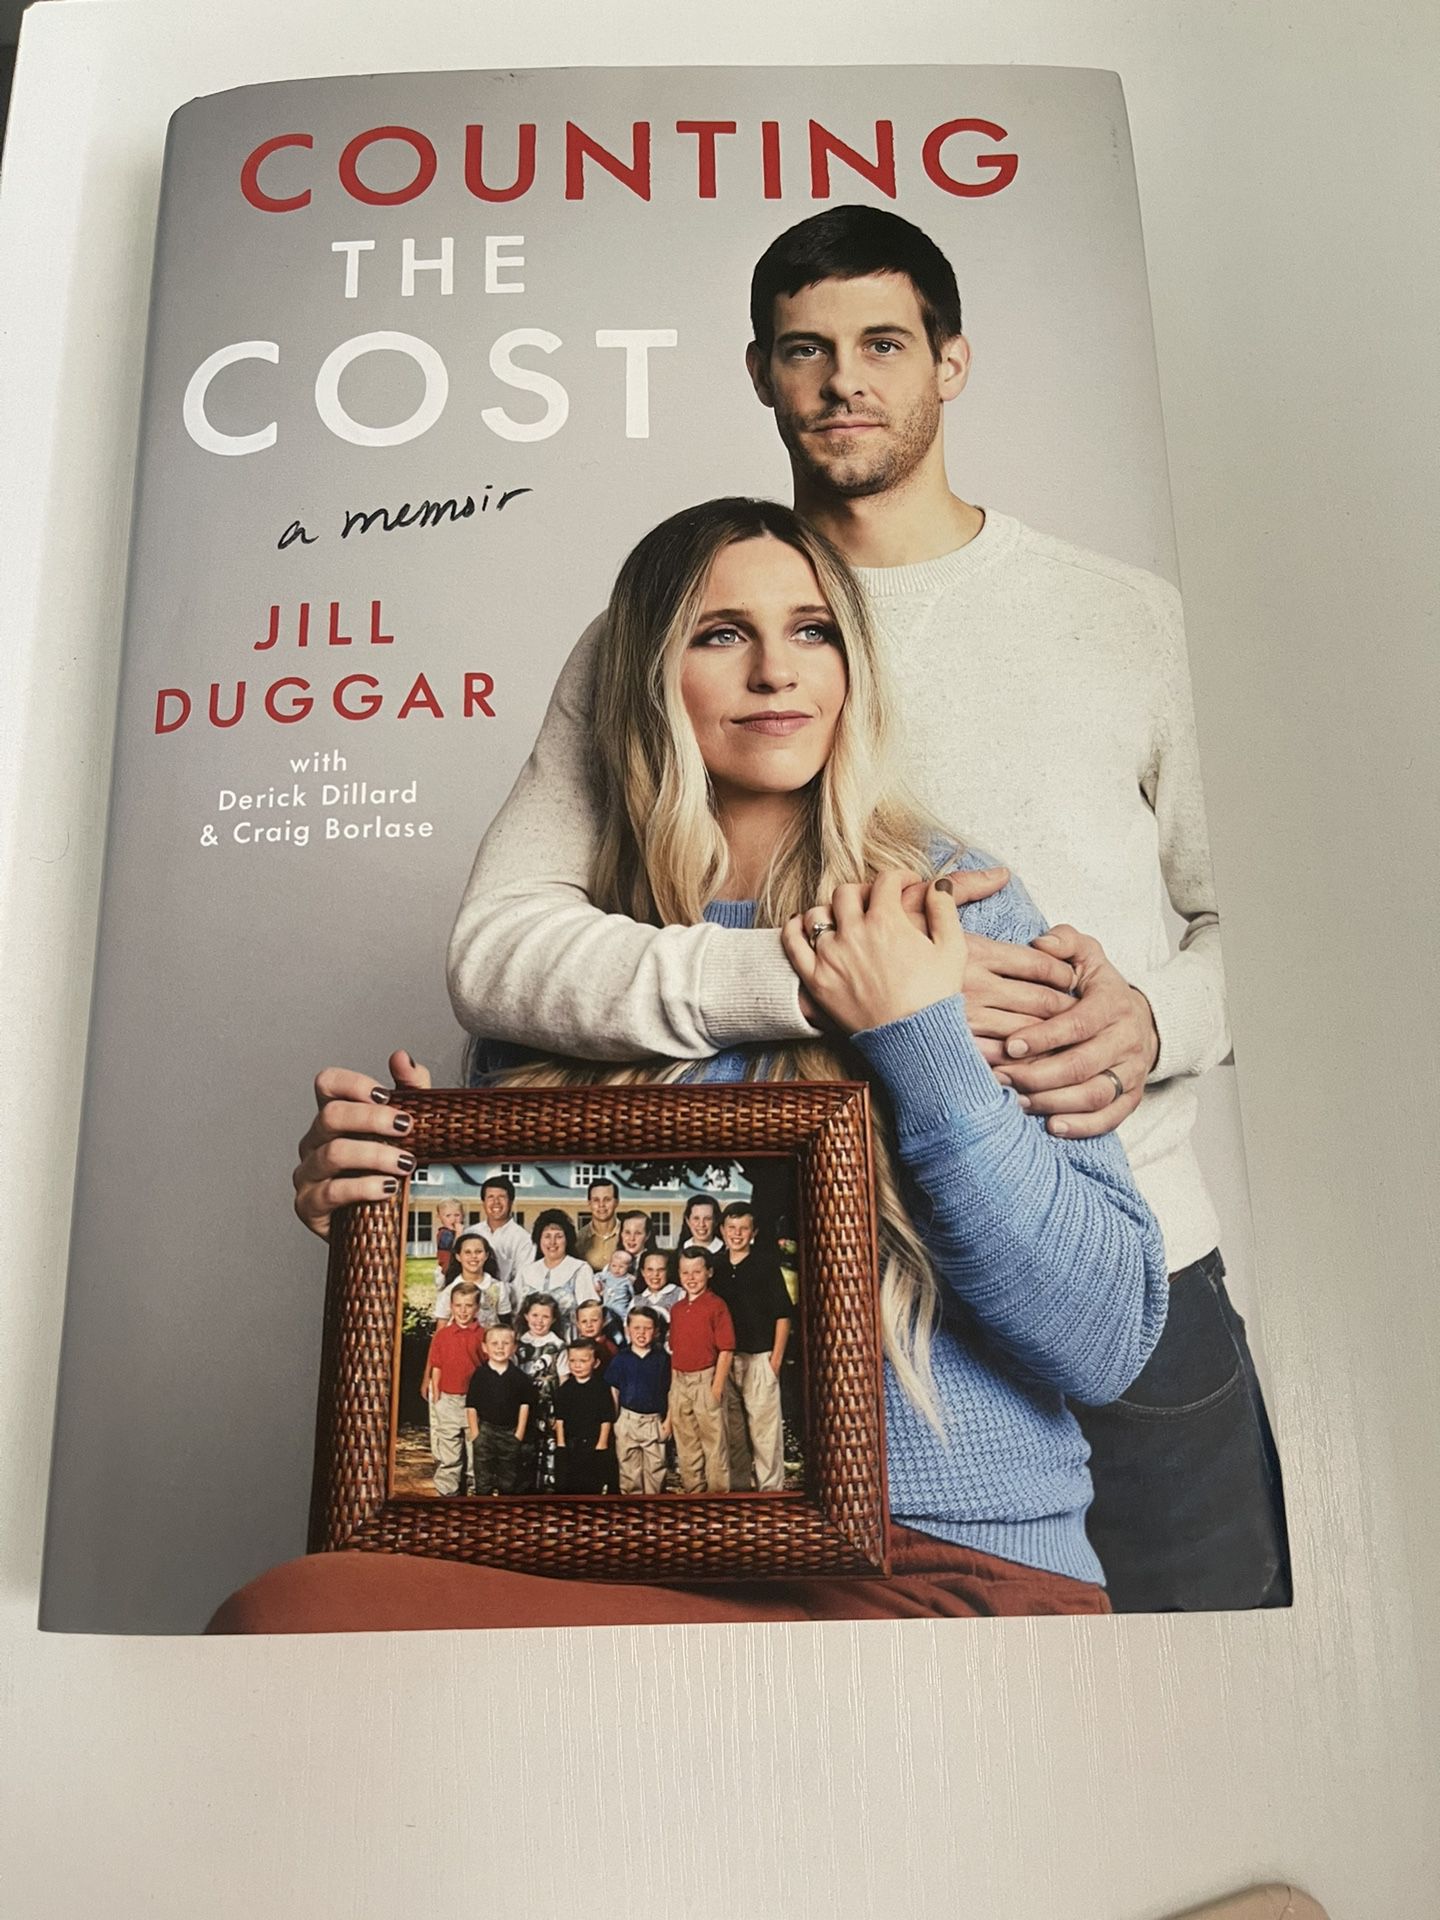 Counting The Cost book Jill Duggar $5